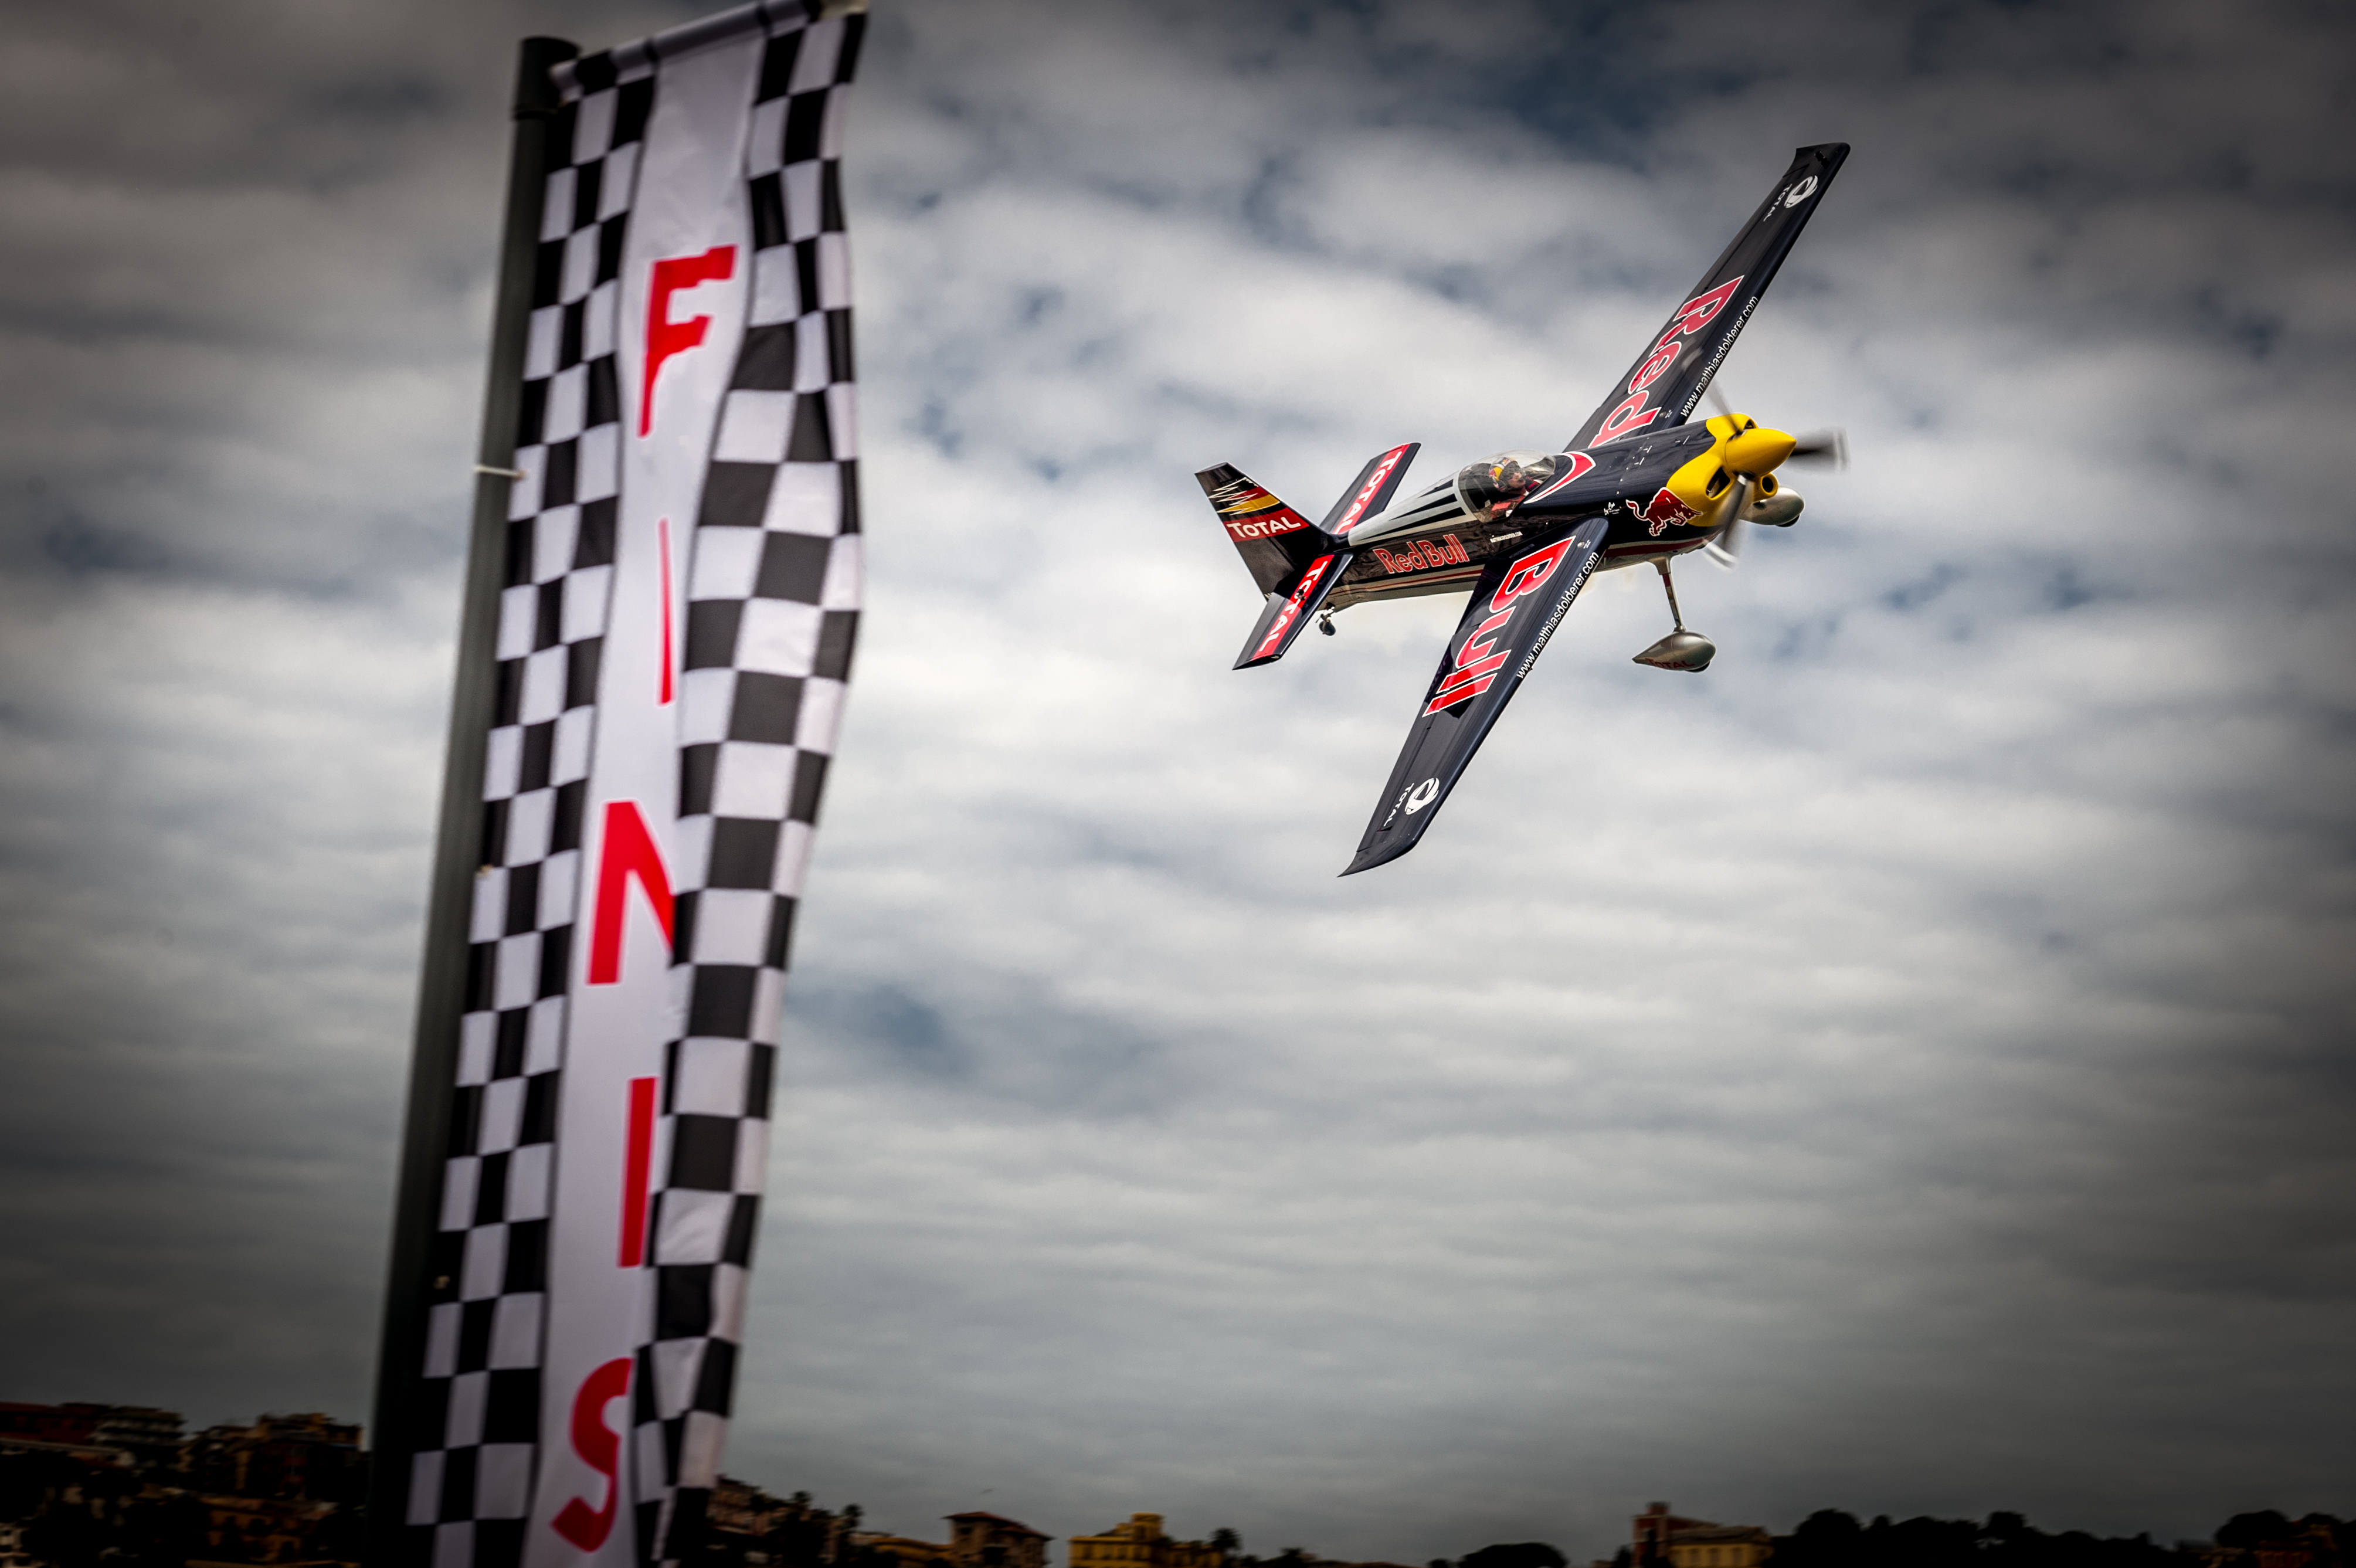 red bull air race, Airplane, Plane, Race, Racing, Red, Bull, Aircraft, Il Wallpaper